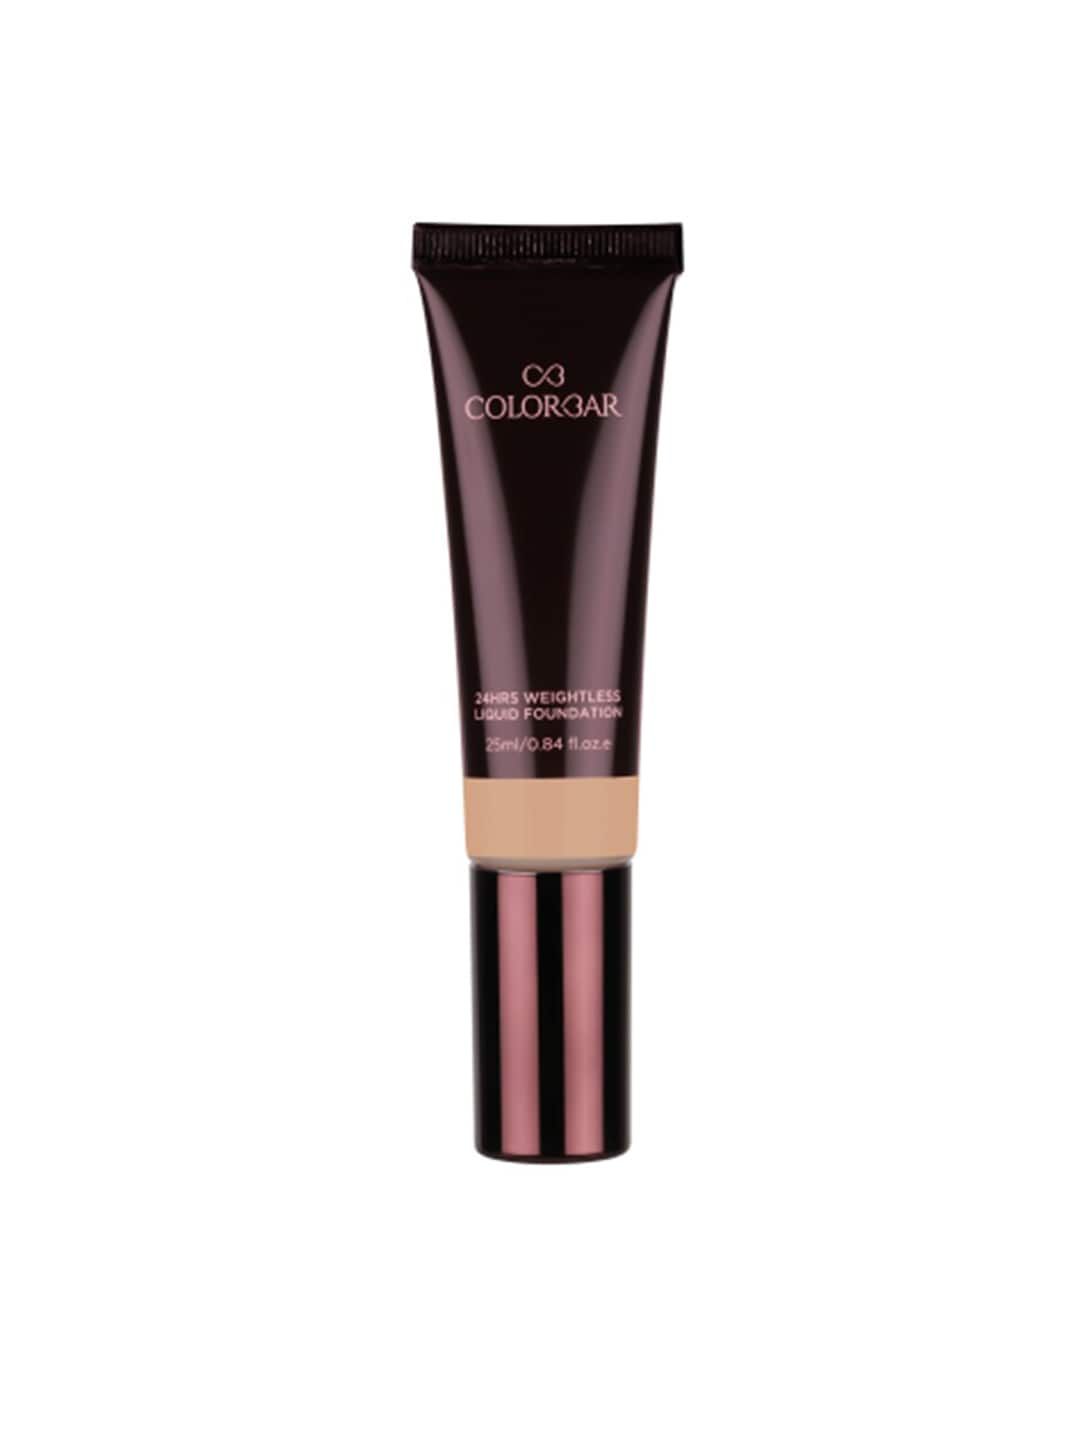 Colorbar 24Hrs Weightless Liquid Foundation - FW 1.4 25ml Price in India